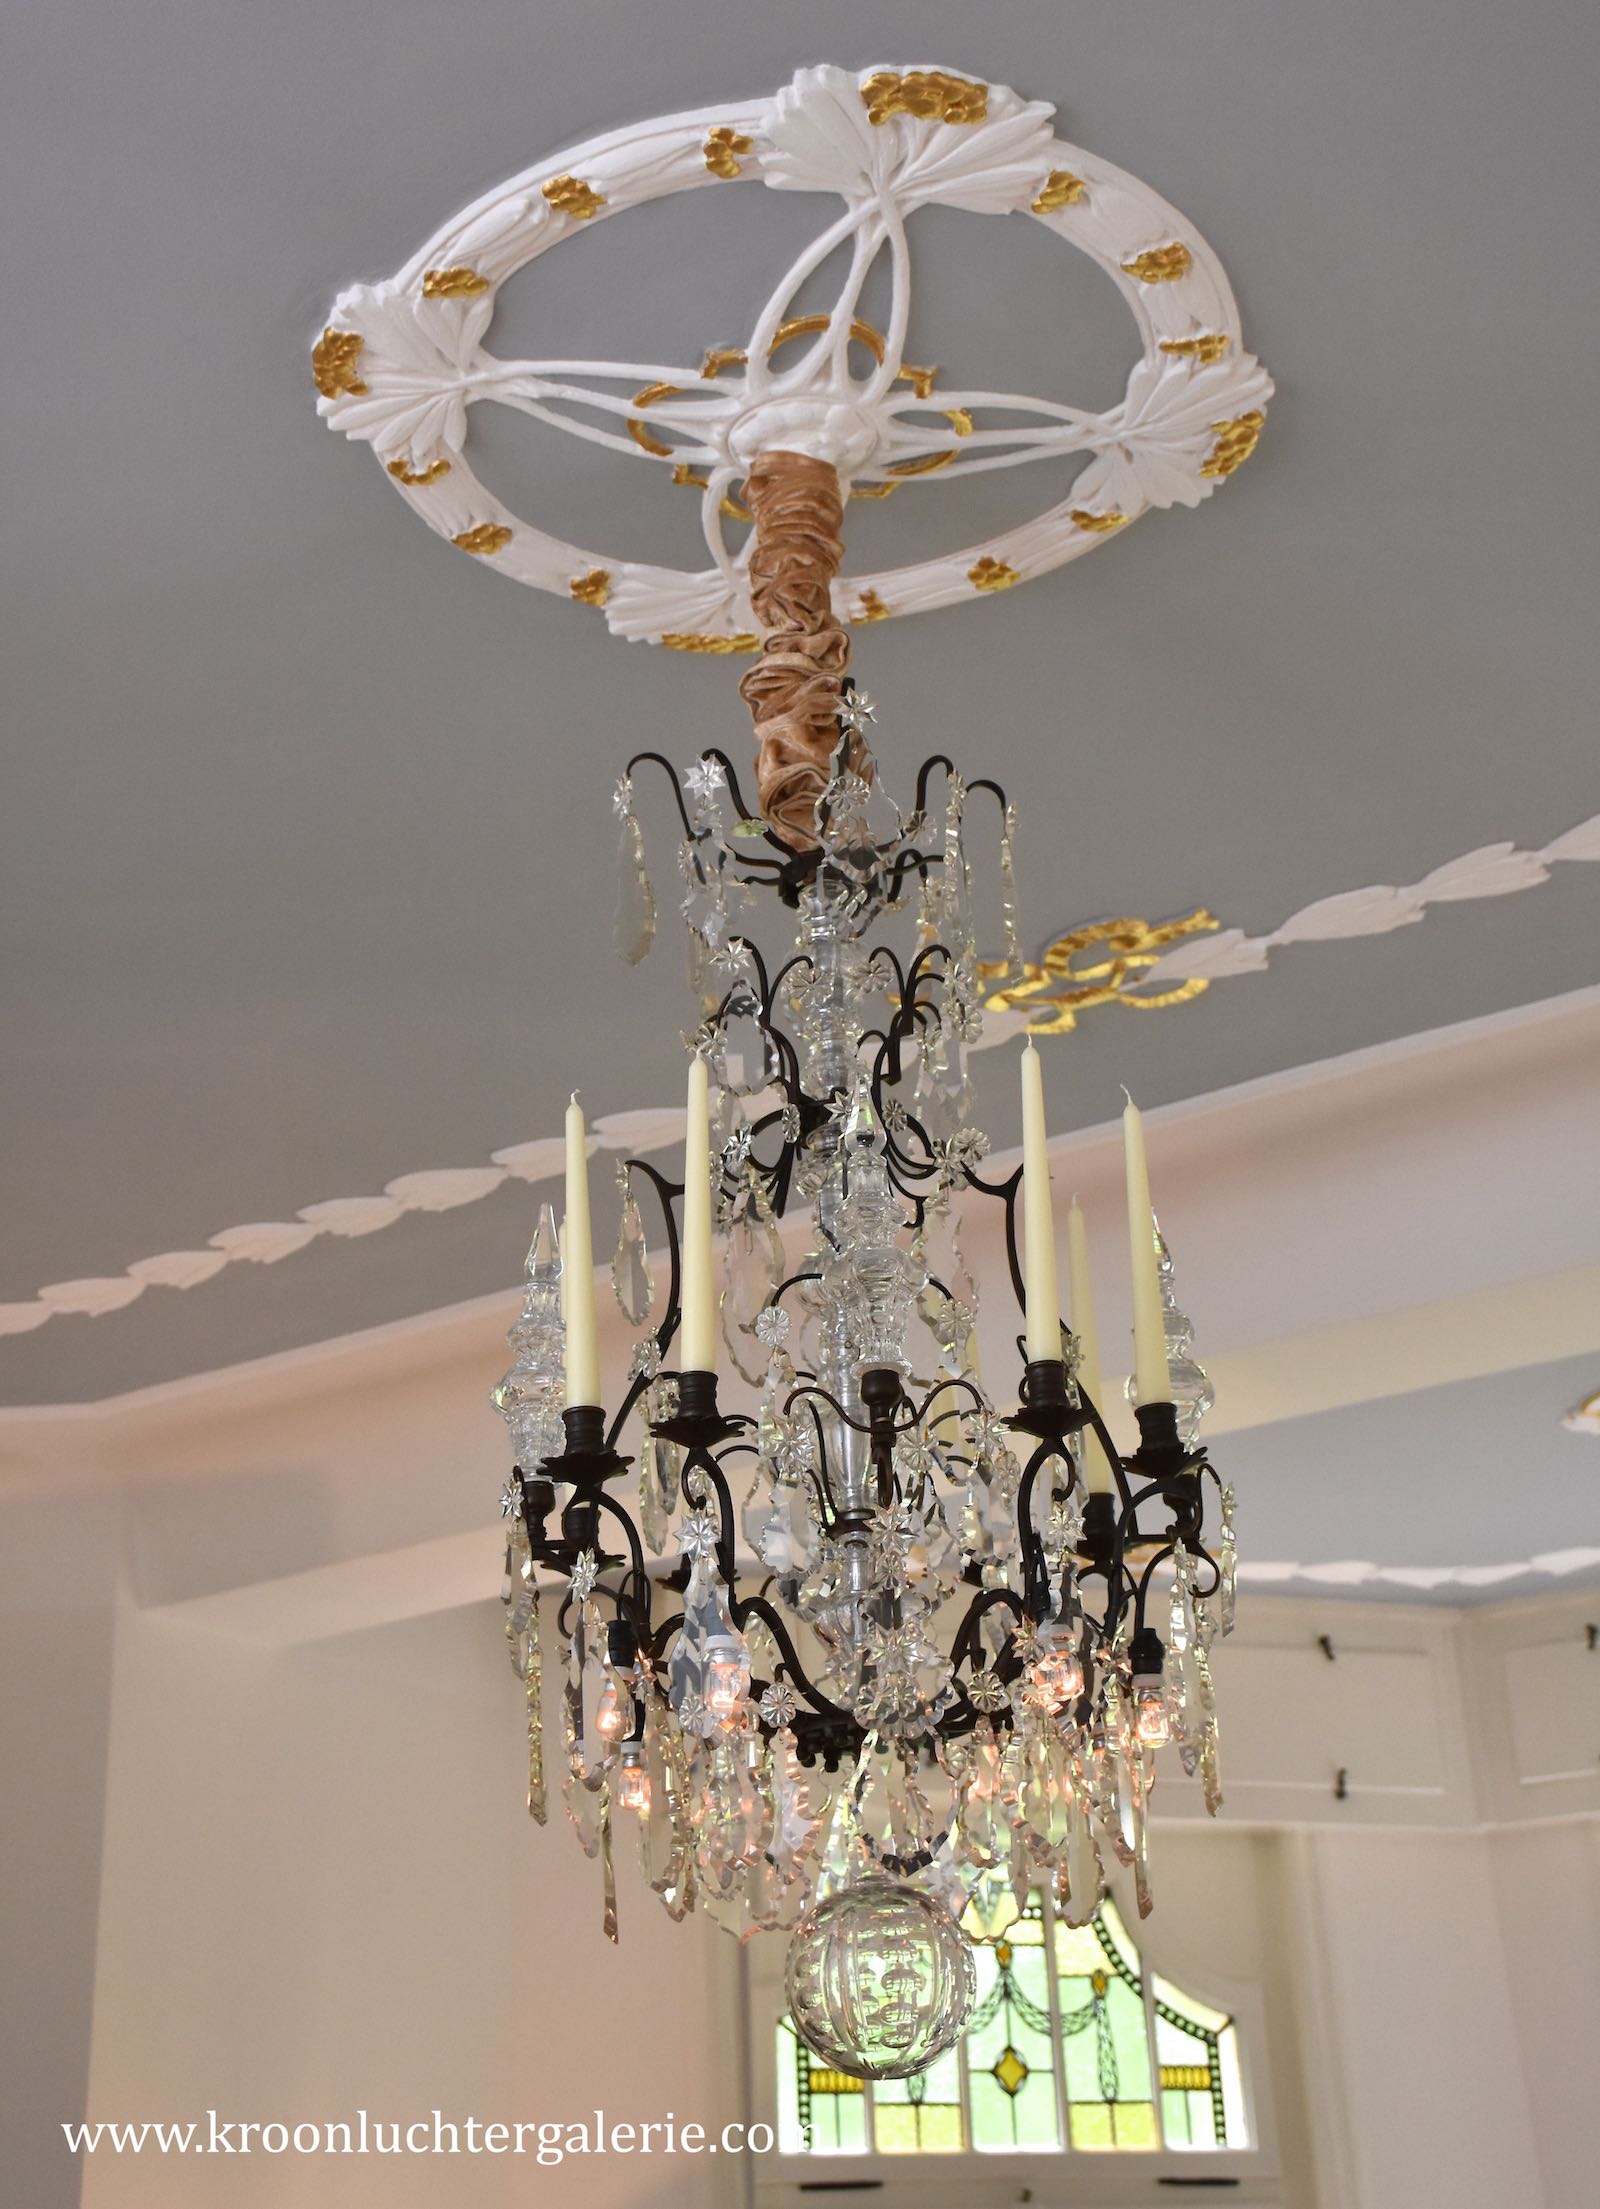 19th century French crystal chandelier with candles